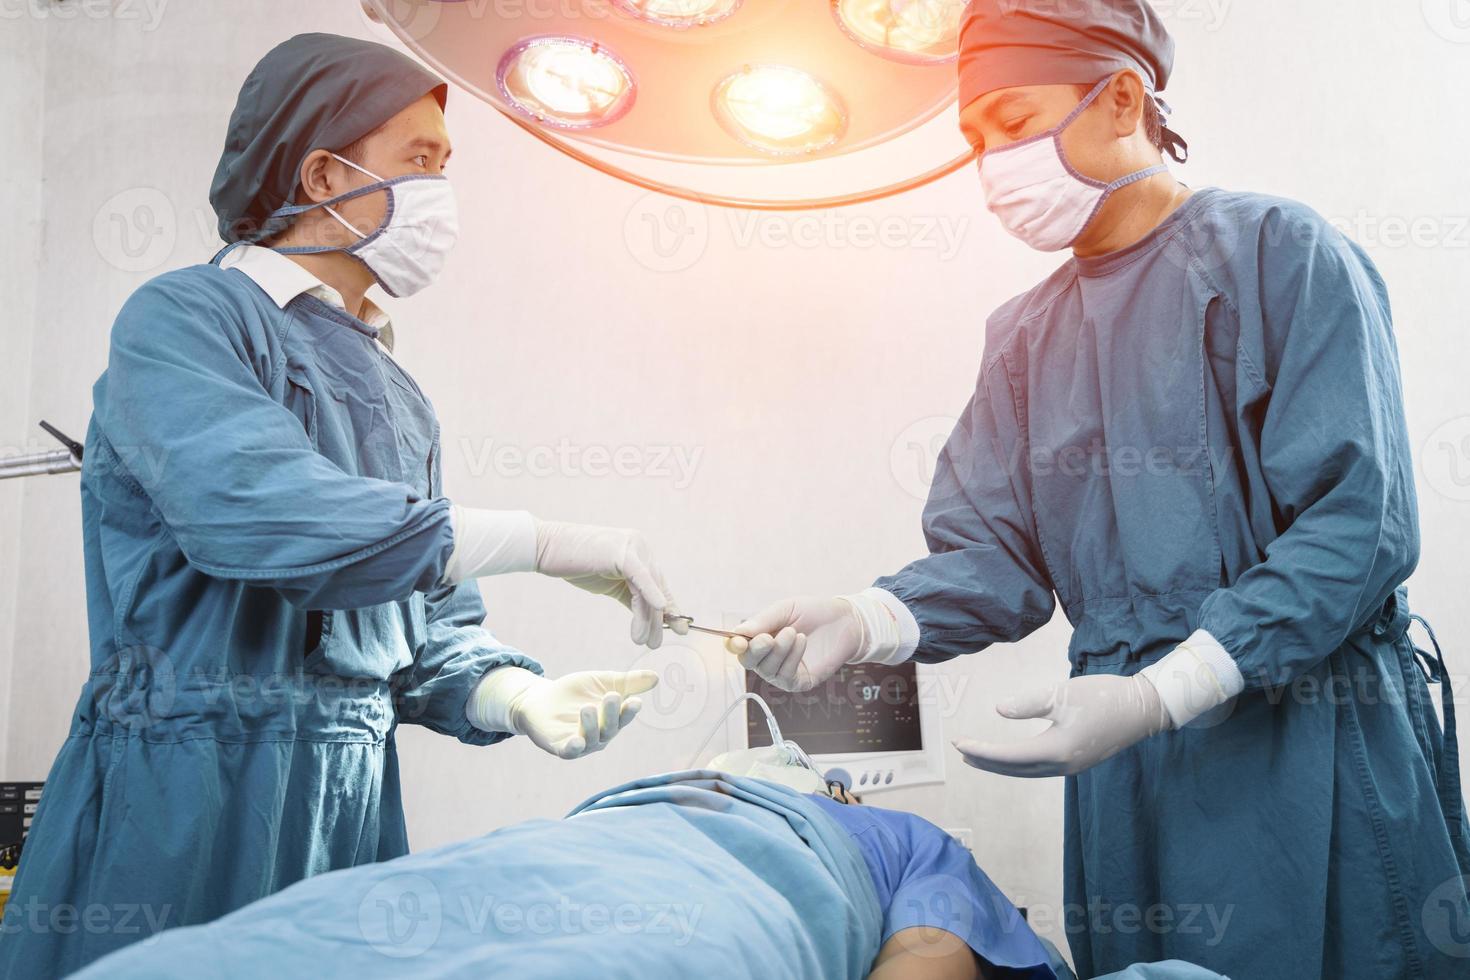 Assistant Hands out Instruments to Surgeons During Operation. Surgery and emergency concept photo